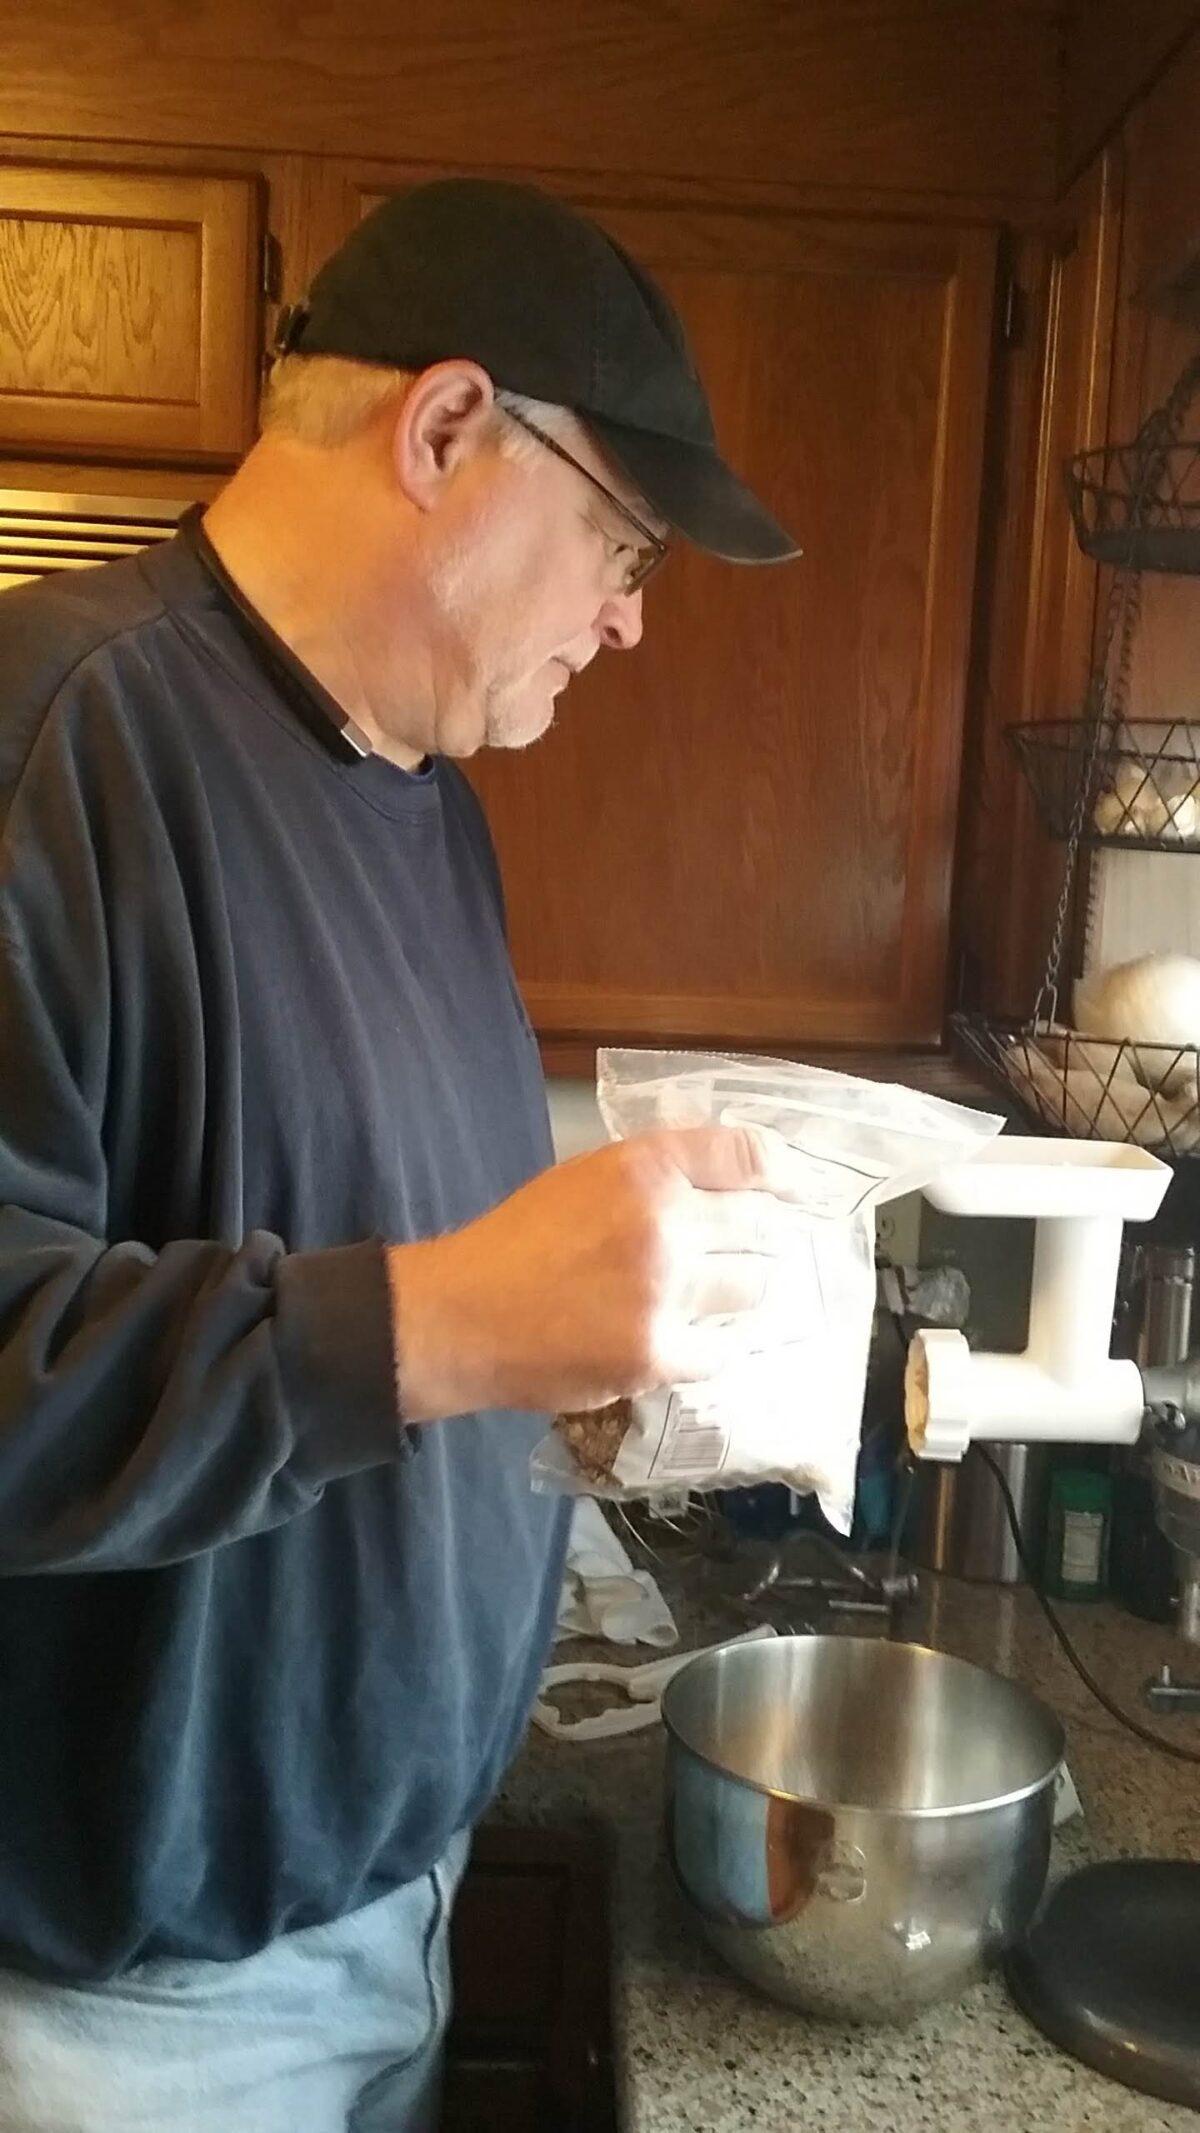 "Dough Whisperer" Mitch Brady grinds walnuts for a batch of his perfected nut rolls. (Courtesy of Mary Lou Young)